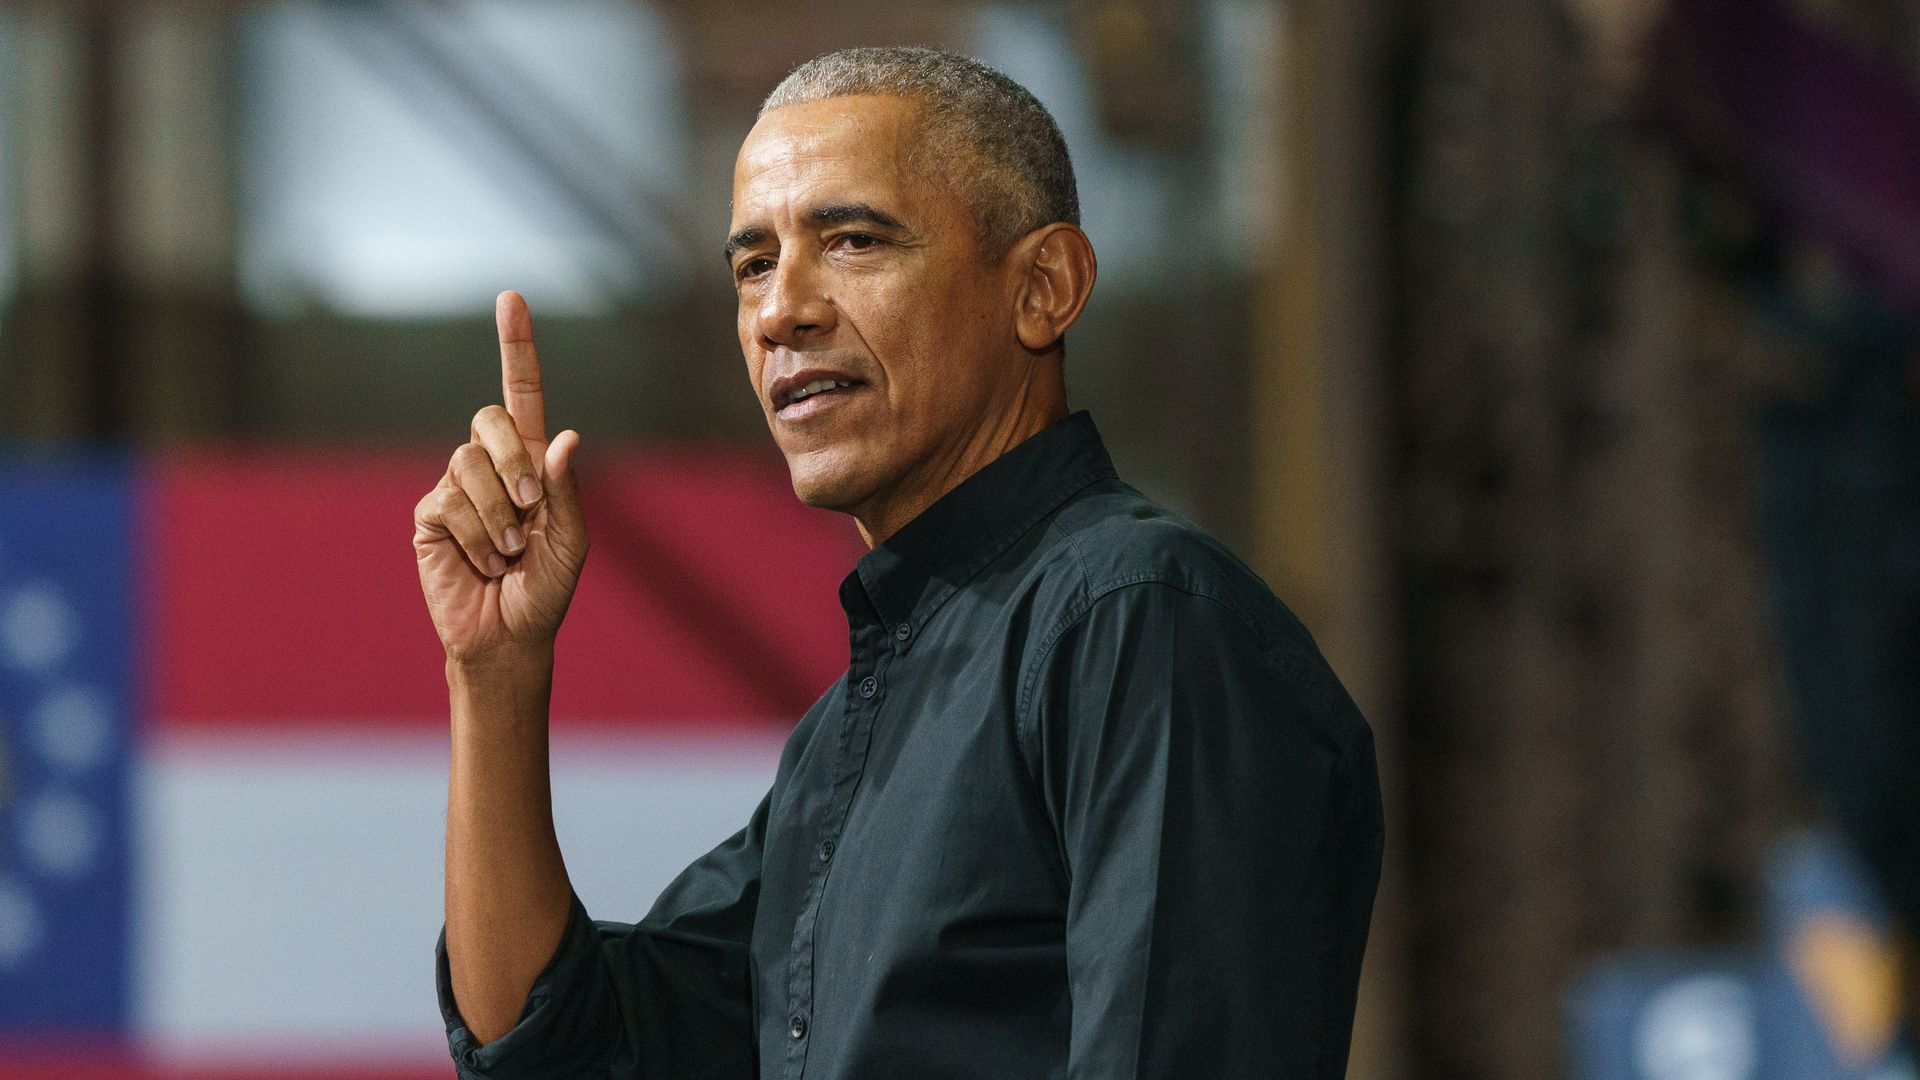 Obama singles out some Nikki Haley and Tim Scott for minimizing racial  inequality